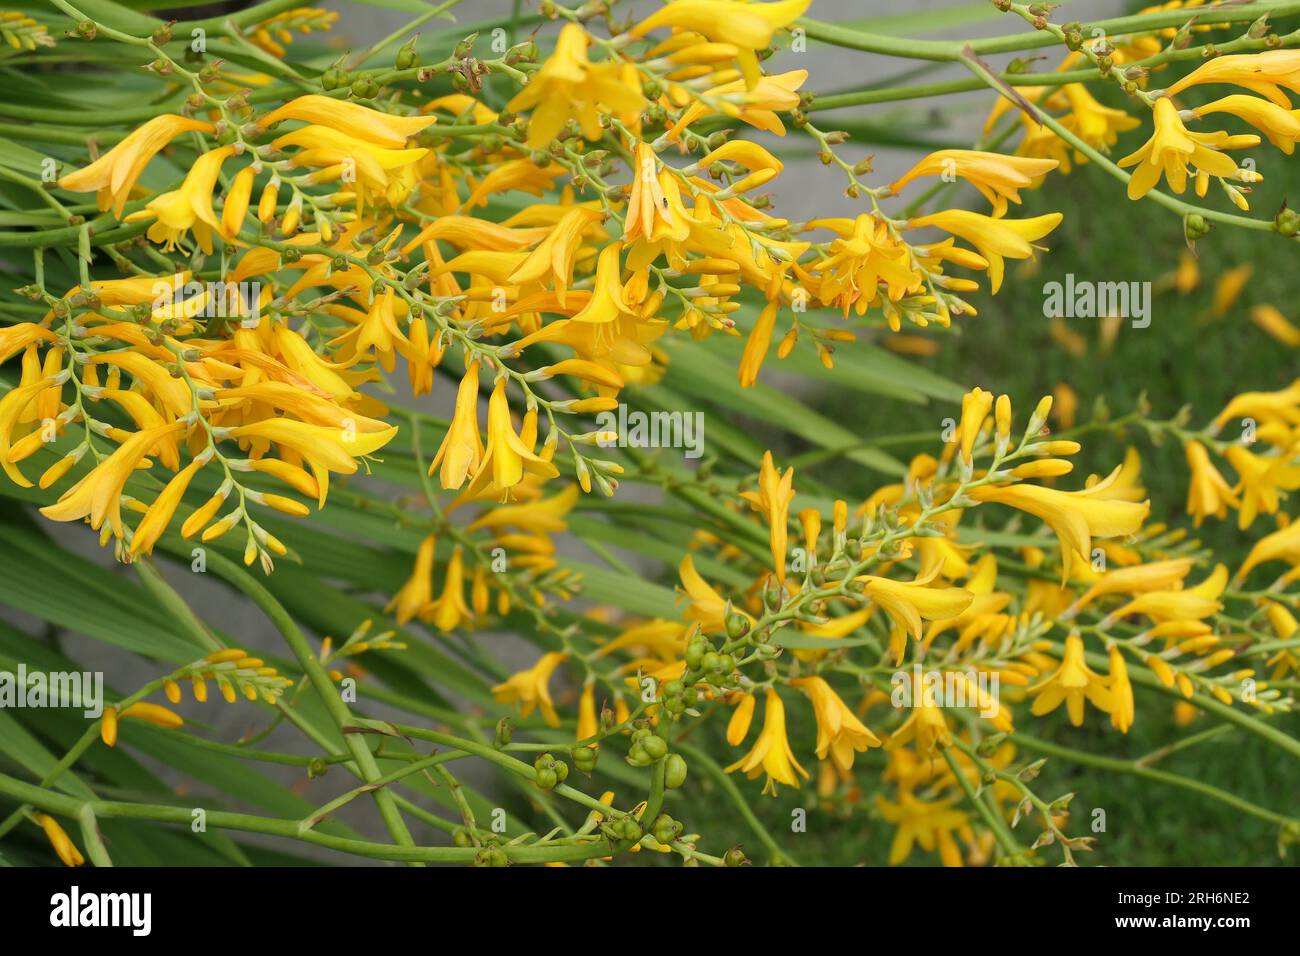 Closeup of the summer long flowering yellow flowers of the perennial herbaceous garden plant Crocosmia Suzanna or Montbretia. Stock Photo